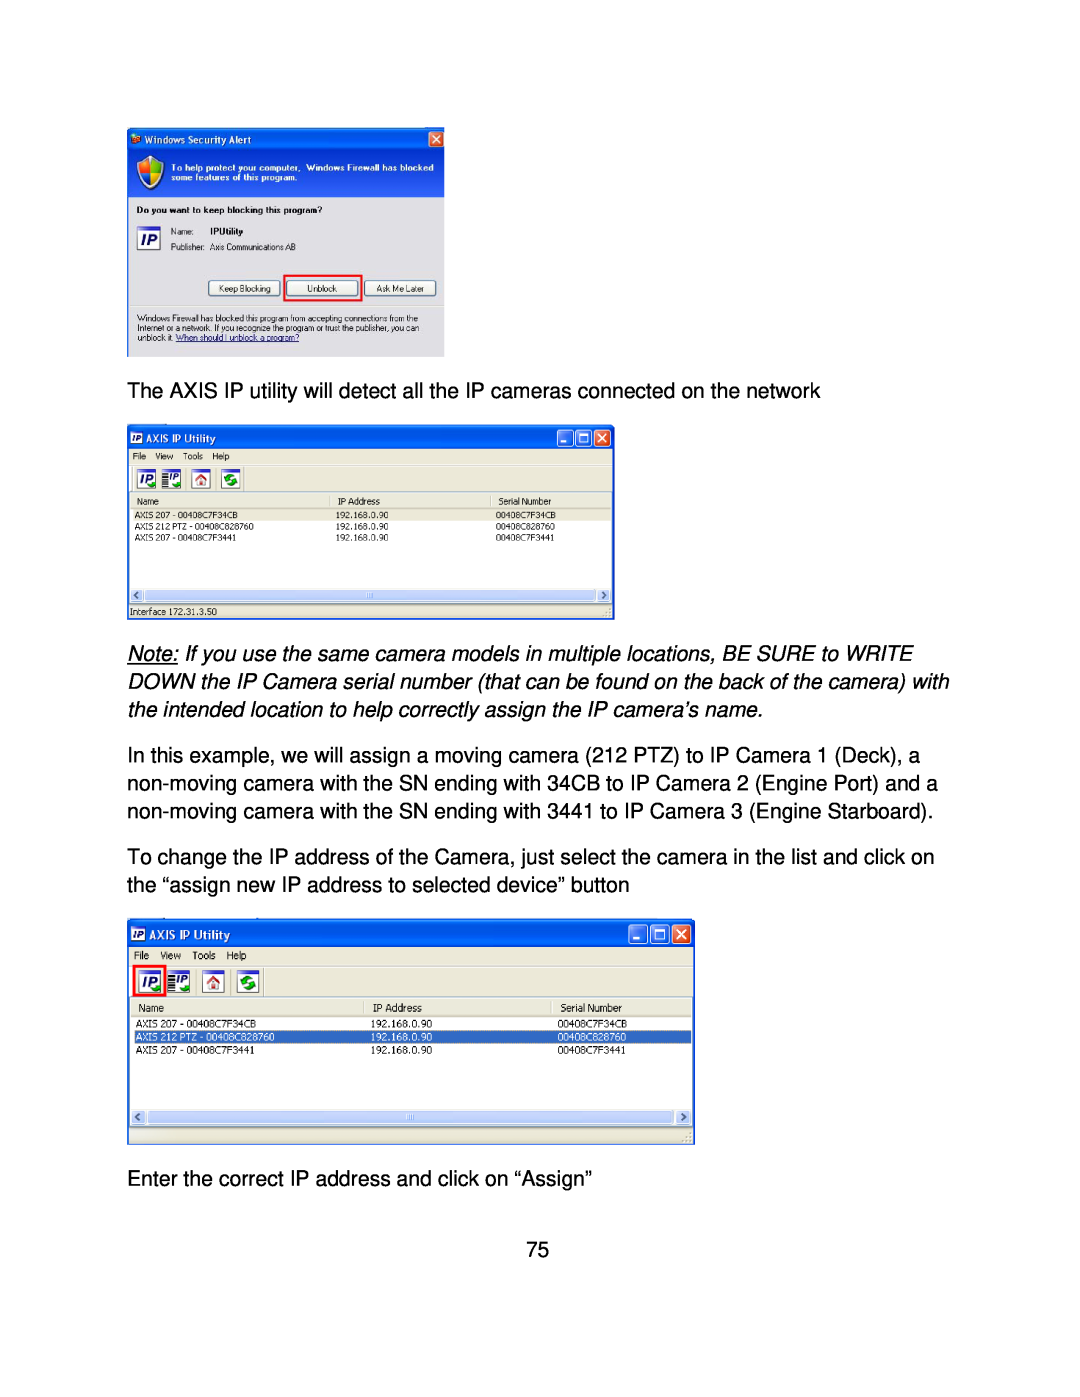 Furuno MFD8/12/BB manual Enter the correct IP address and click on “Assign” 